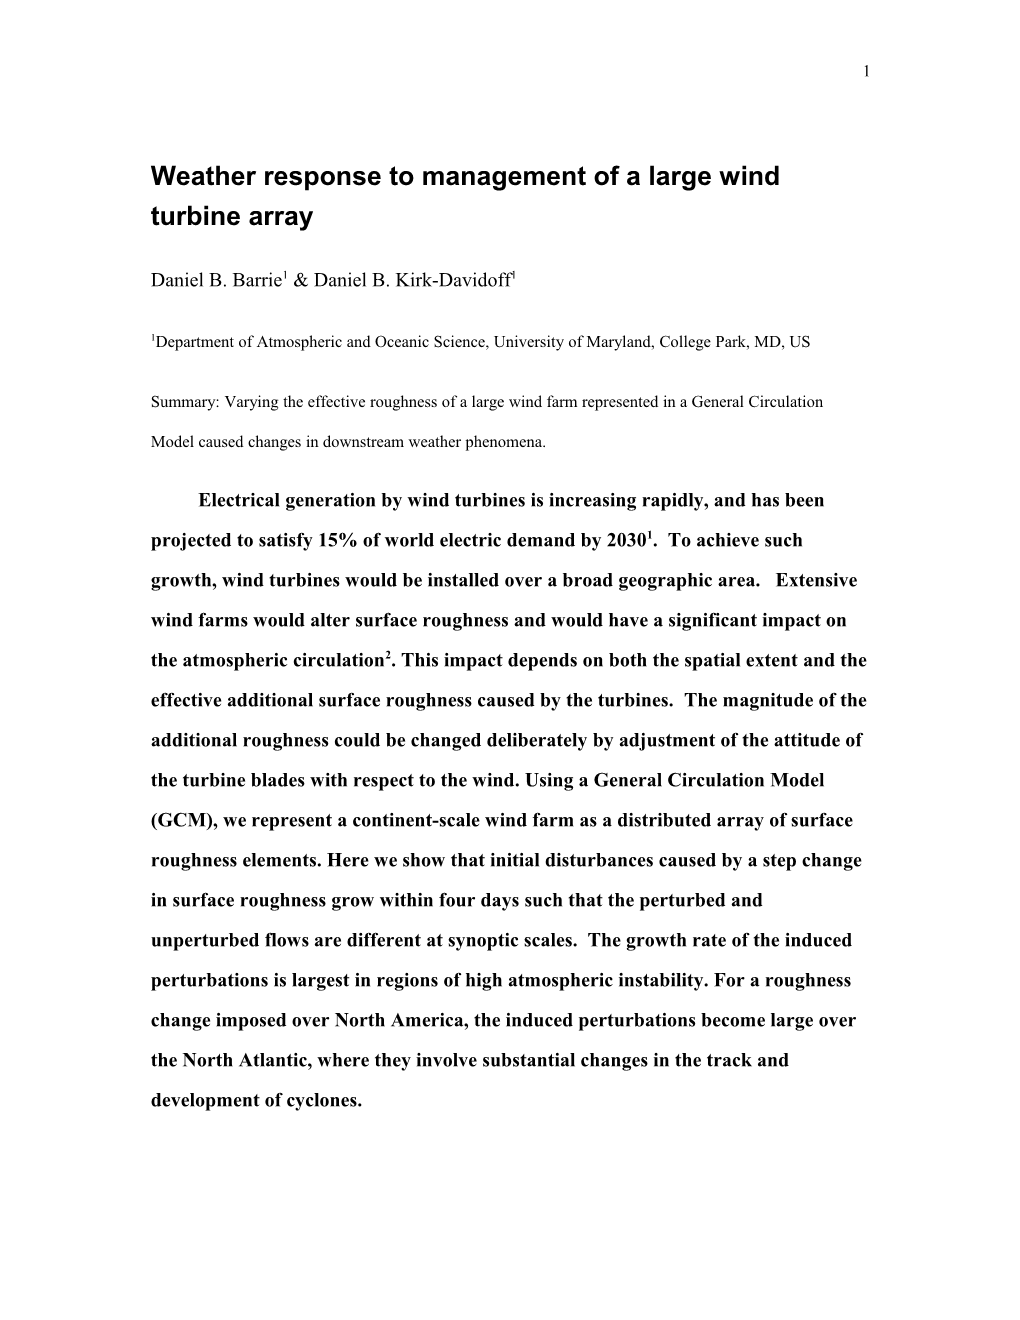 Weather Response to Management of a Large Wind Turbine Array